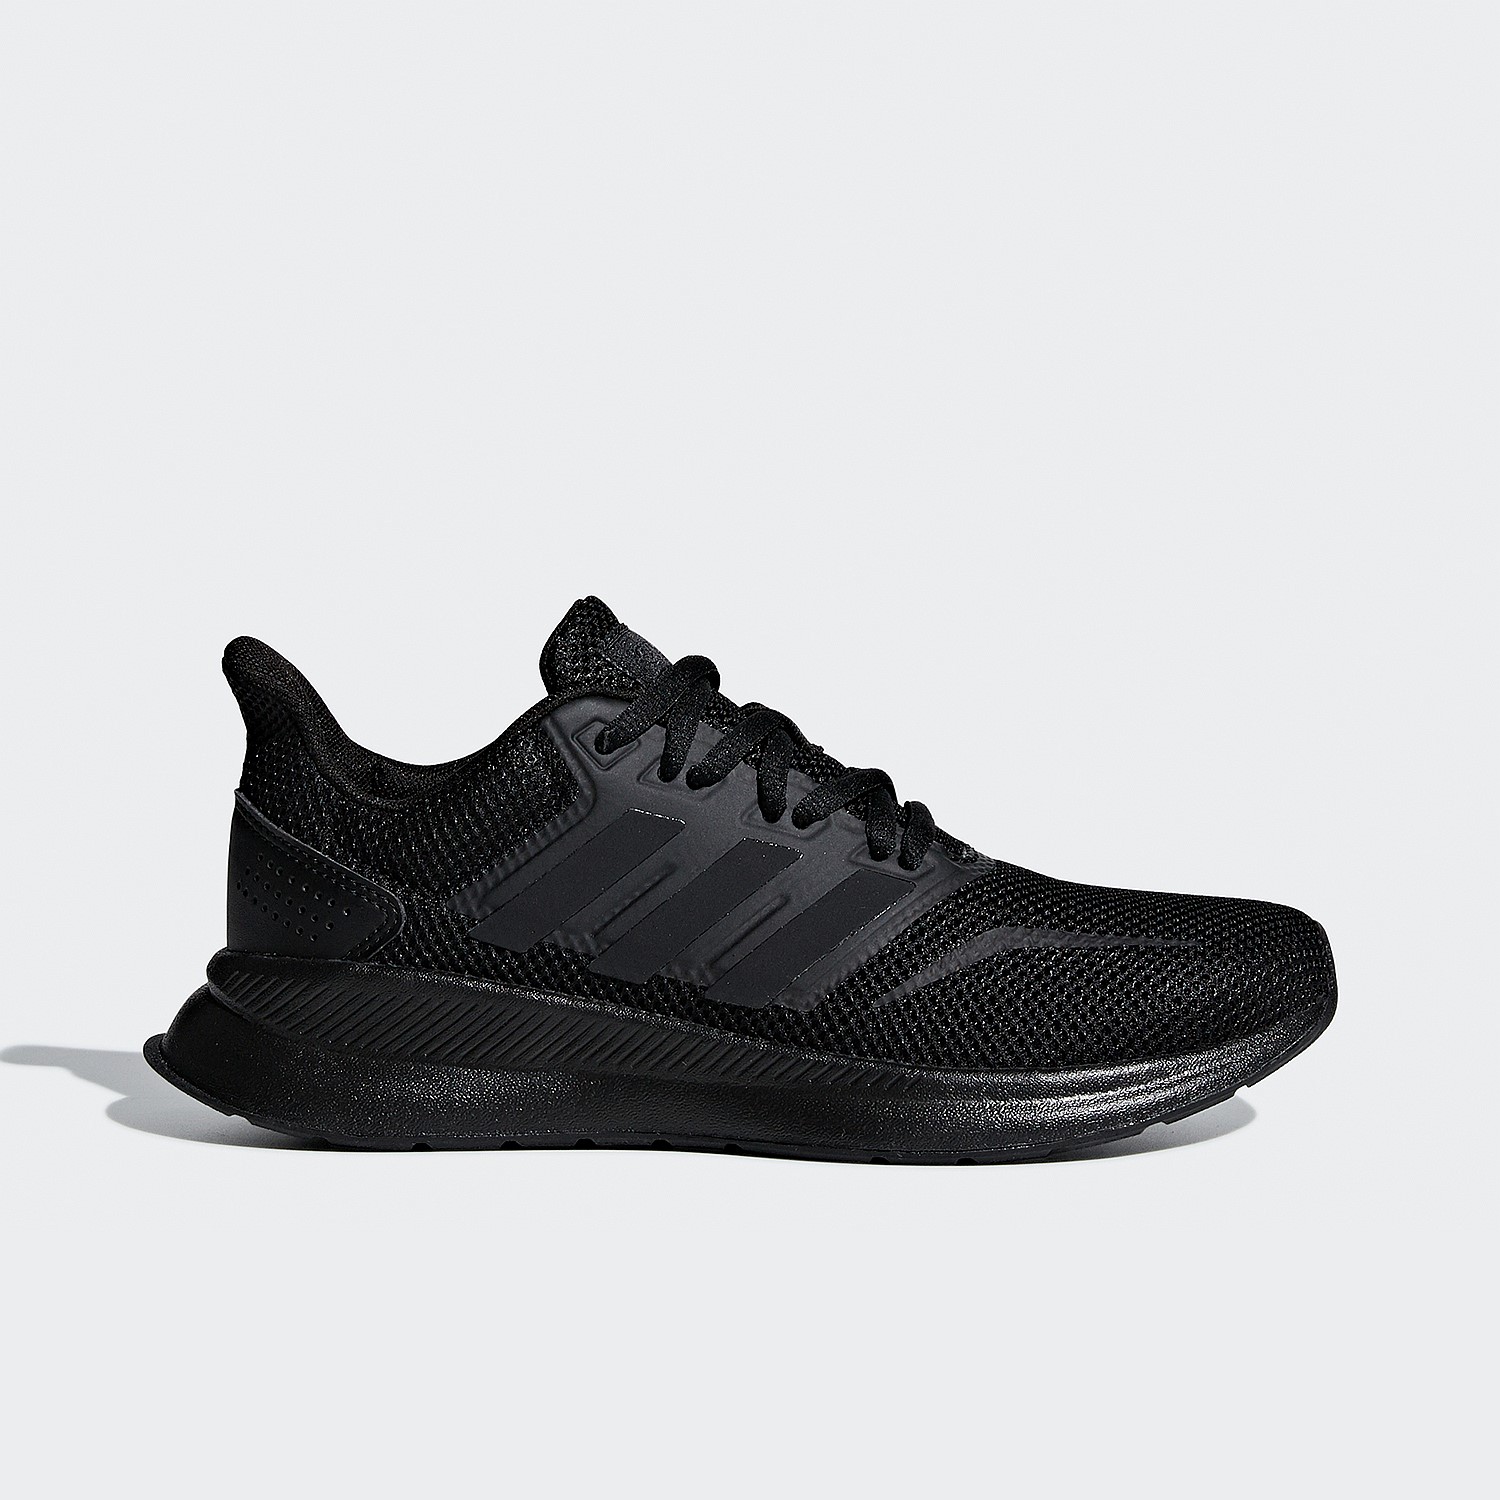 stirling sports adidas shoes